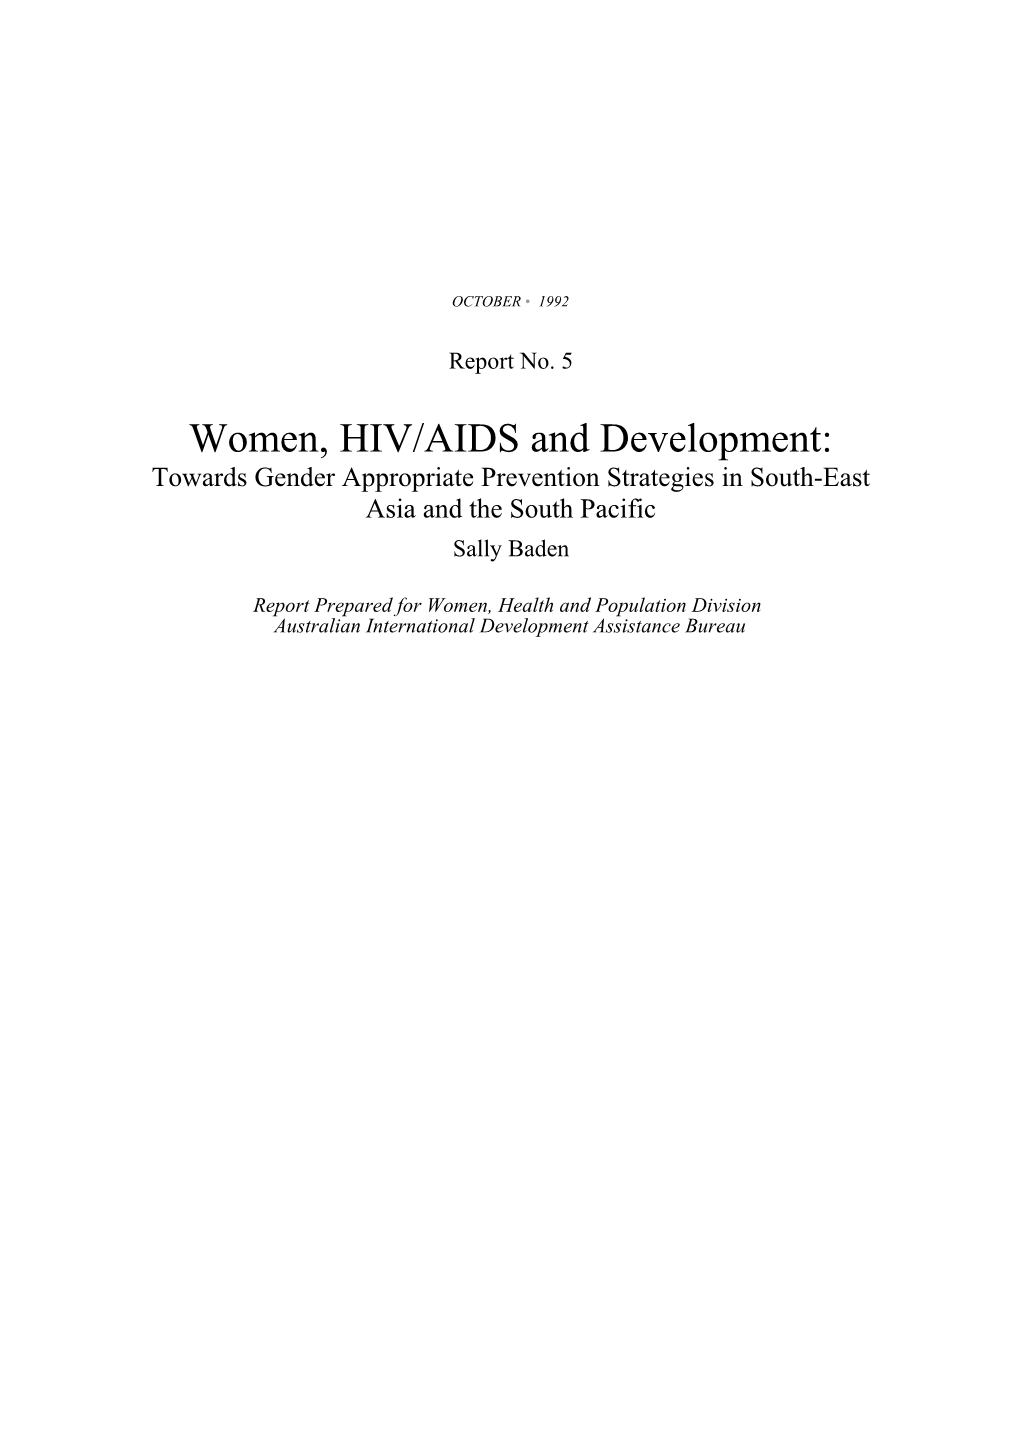 AIDS/HIV And Development - Towards Gender Appropriate Strategies For Change In SE Asia And The South Pacific